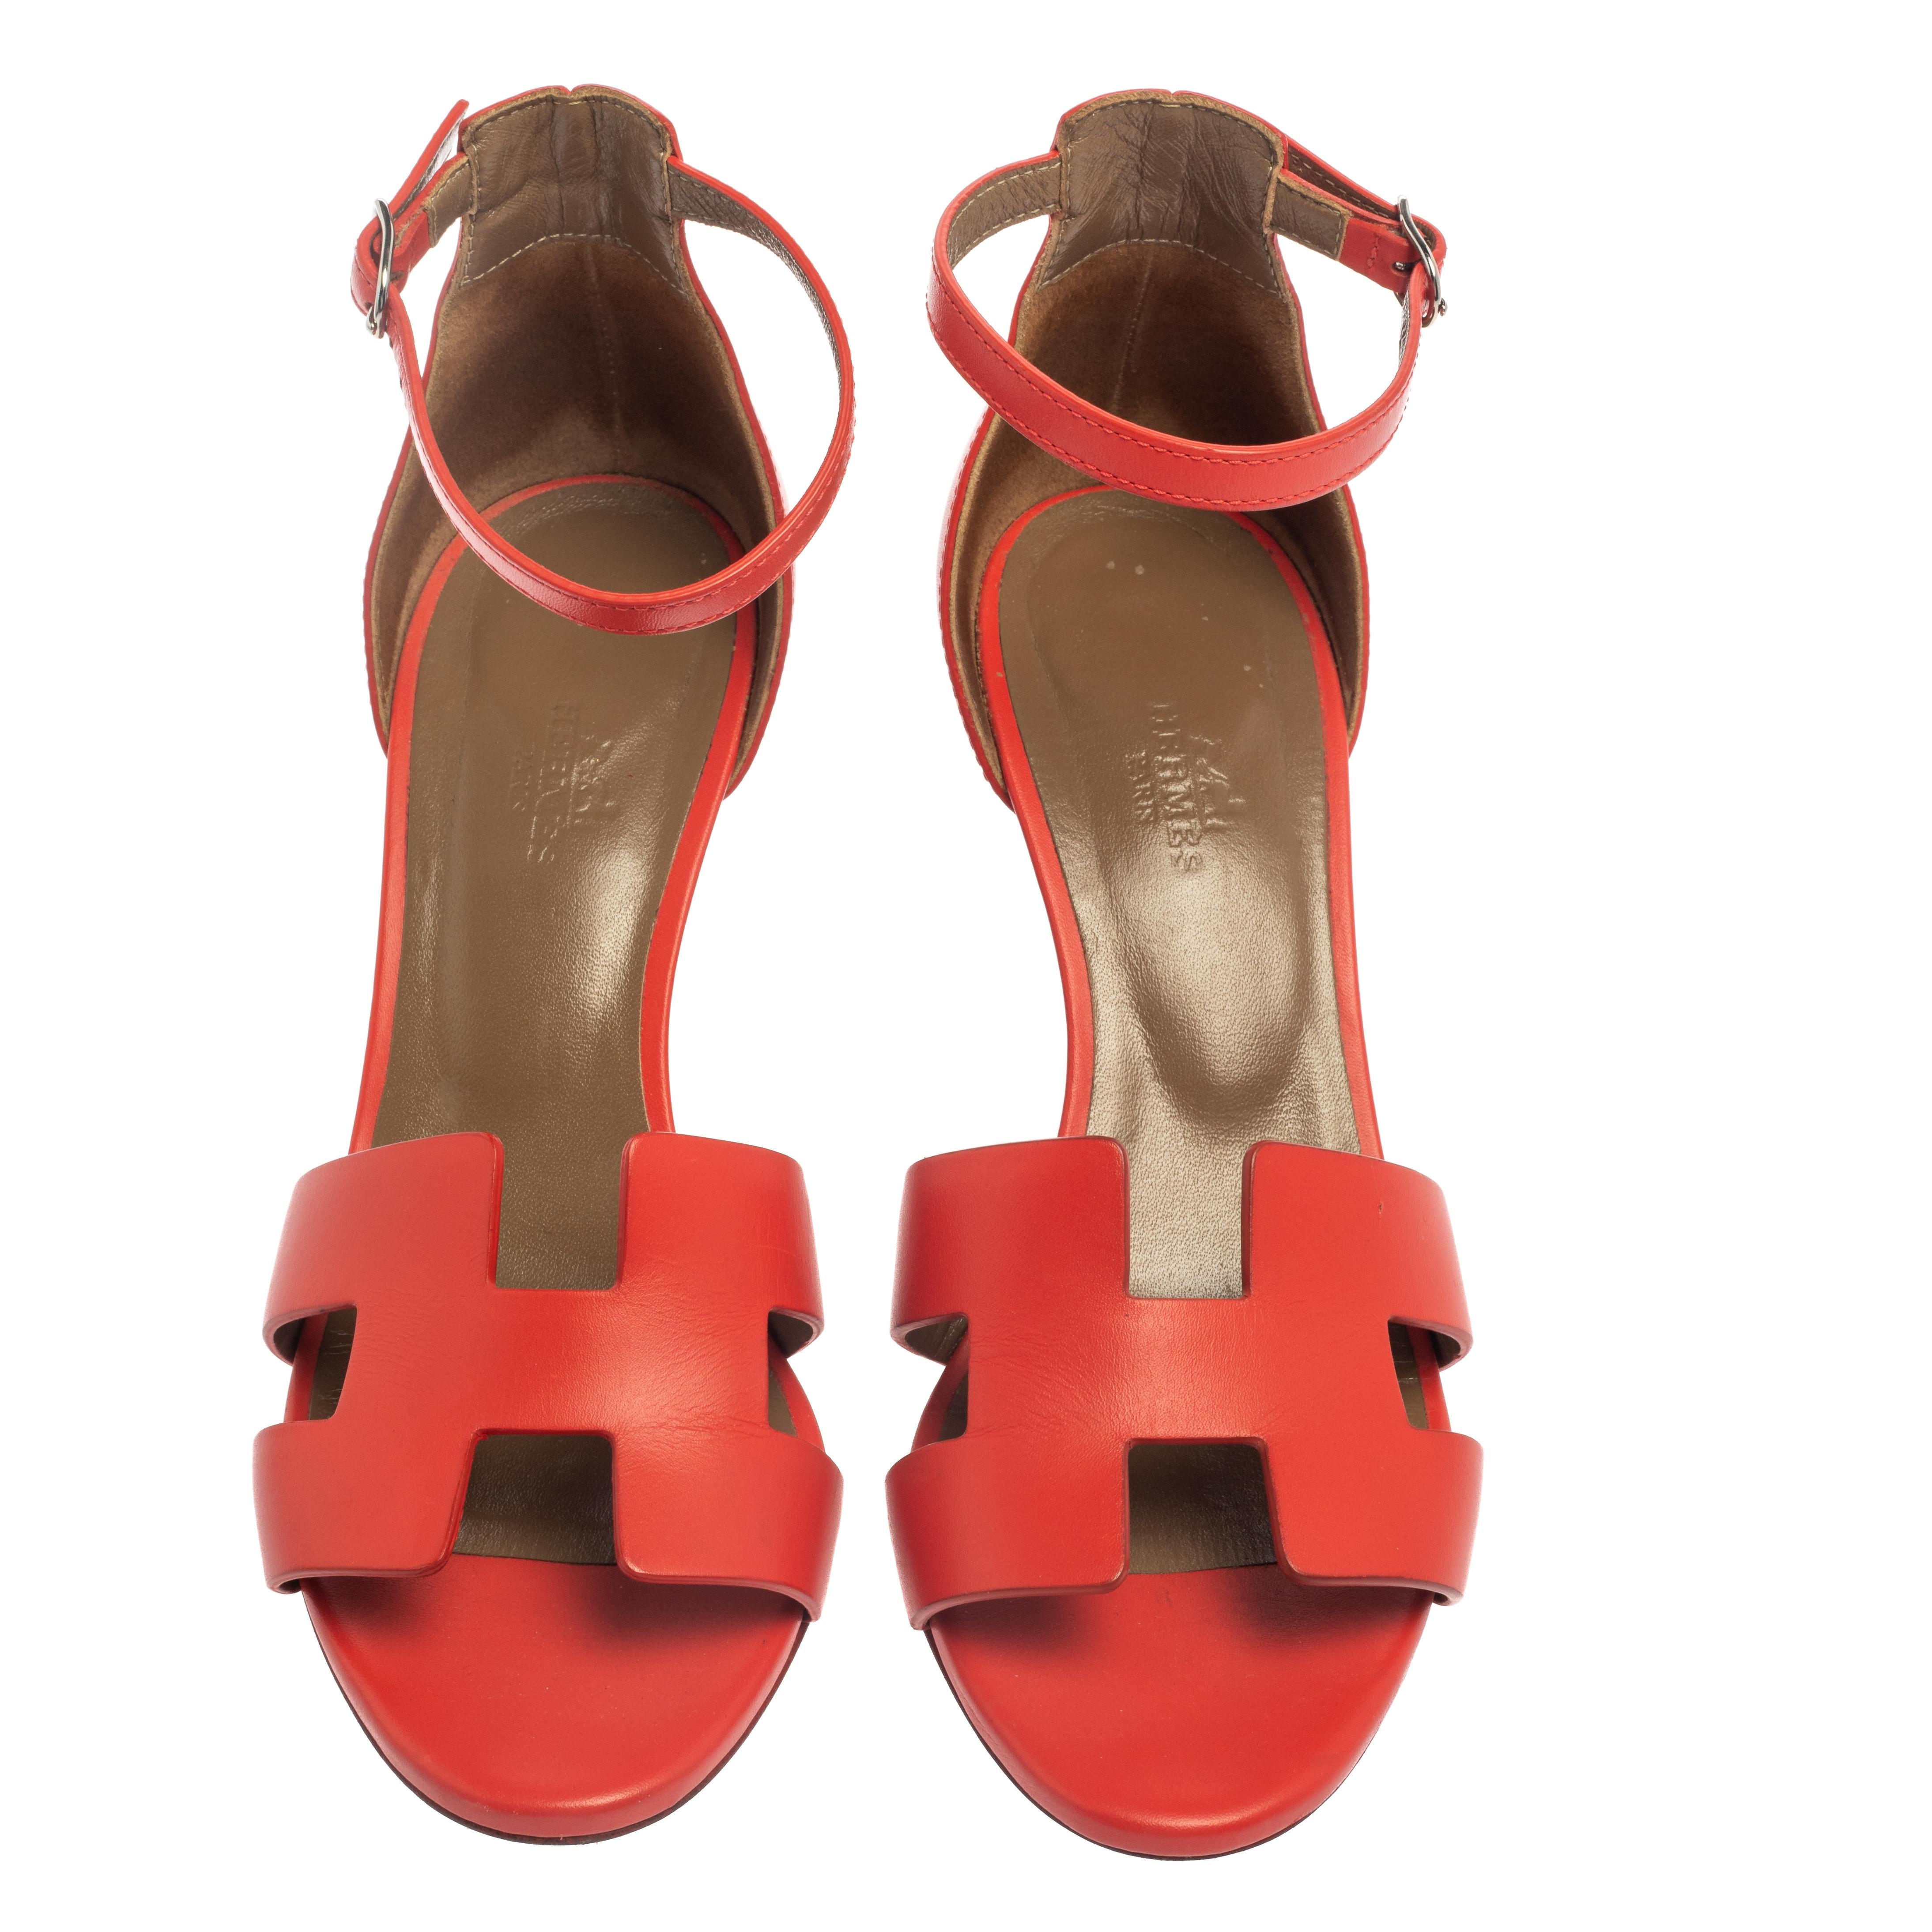 Simple and classic designs never go out of style, especially when a contemporary touch is added with the wedge heels. Hermes' leather sandals come with the iconic H straps on the uppers, open toes, and silver-tone buckles. Comfortable to wear and